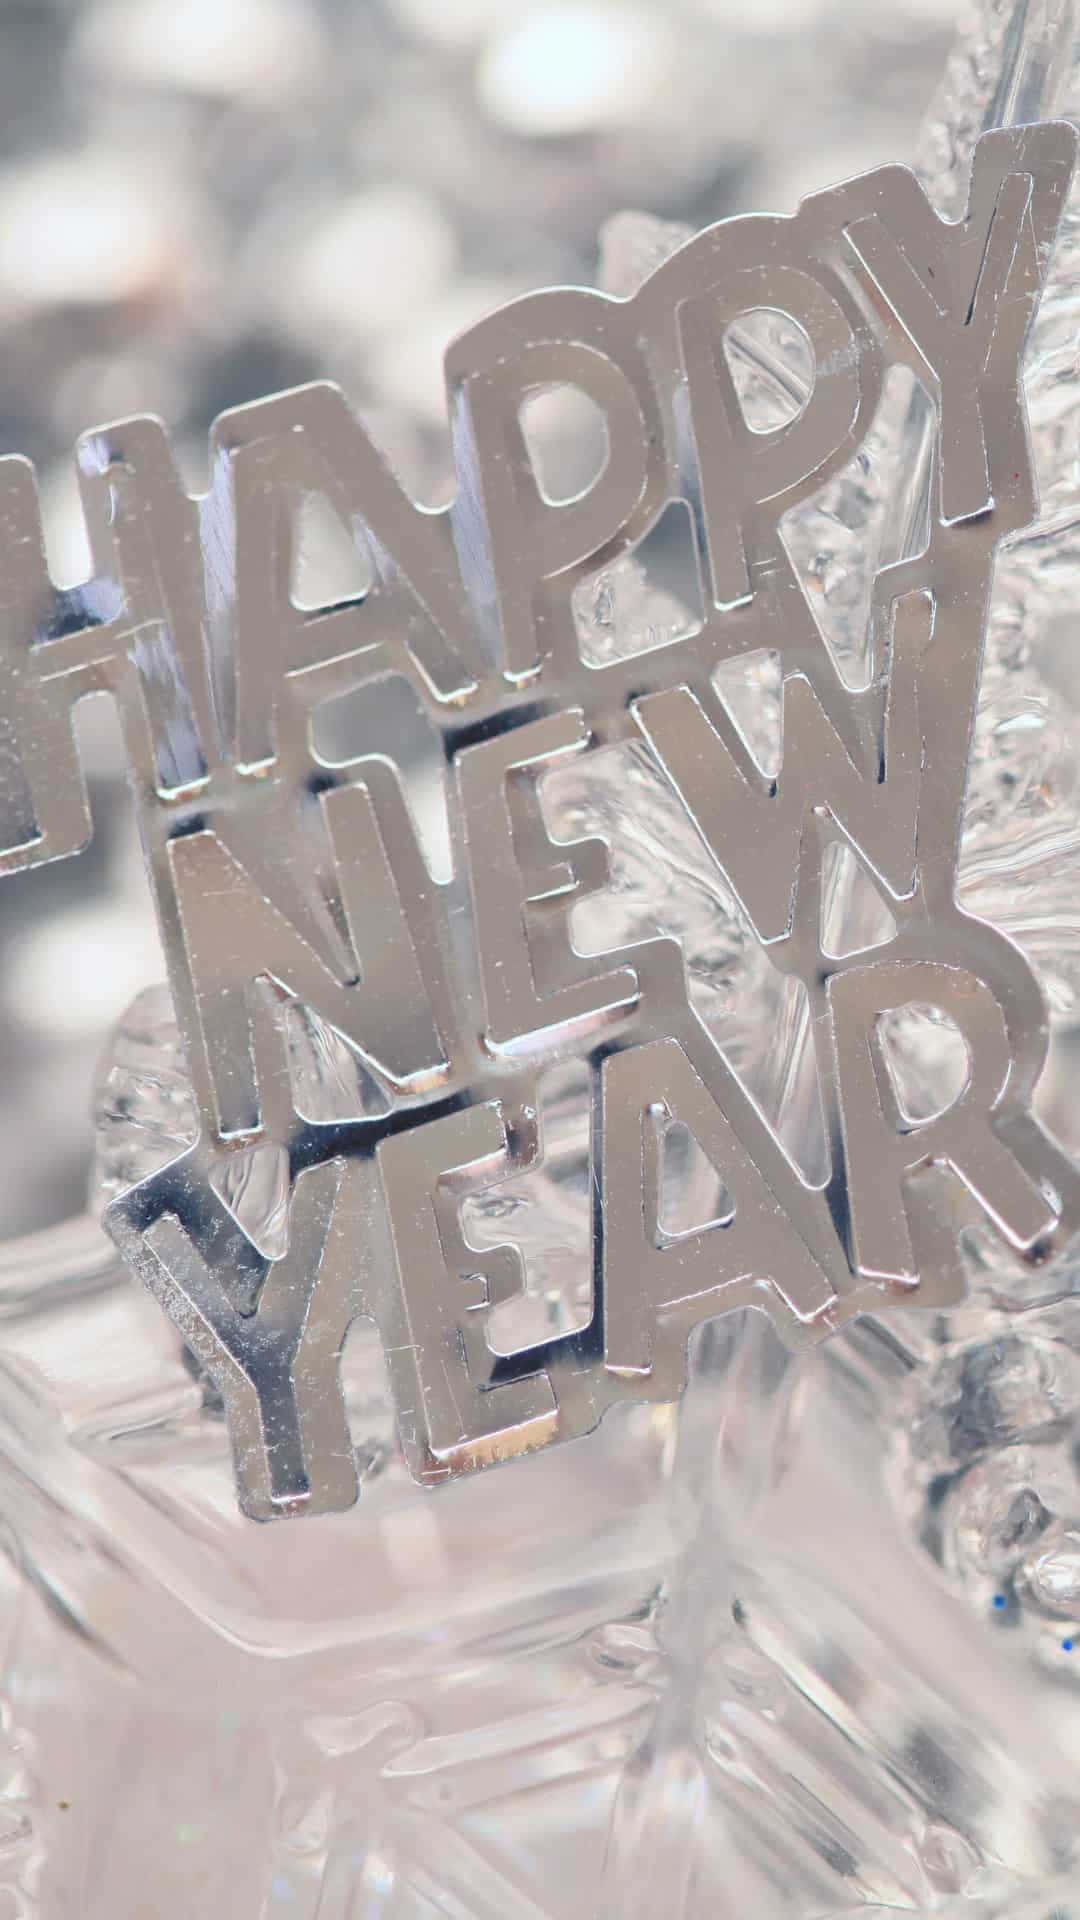 Enjoy the start of a new year with an iPhone 12! Wallpaper